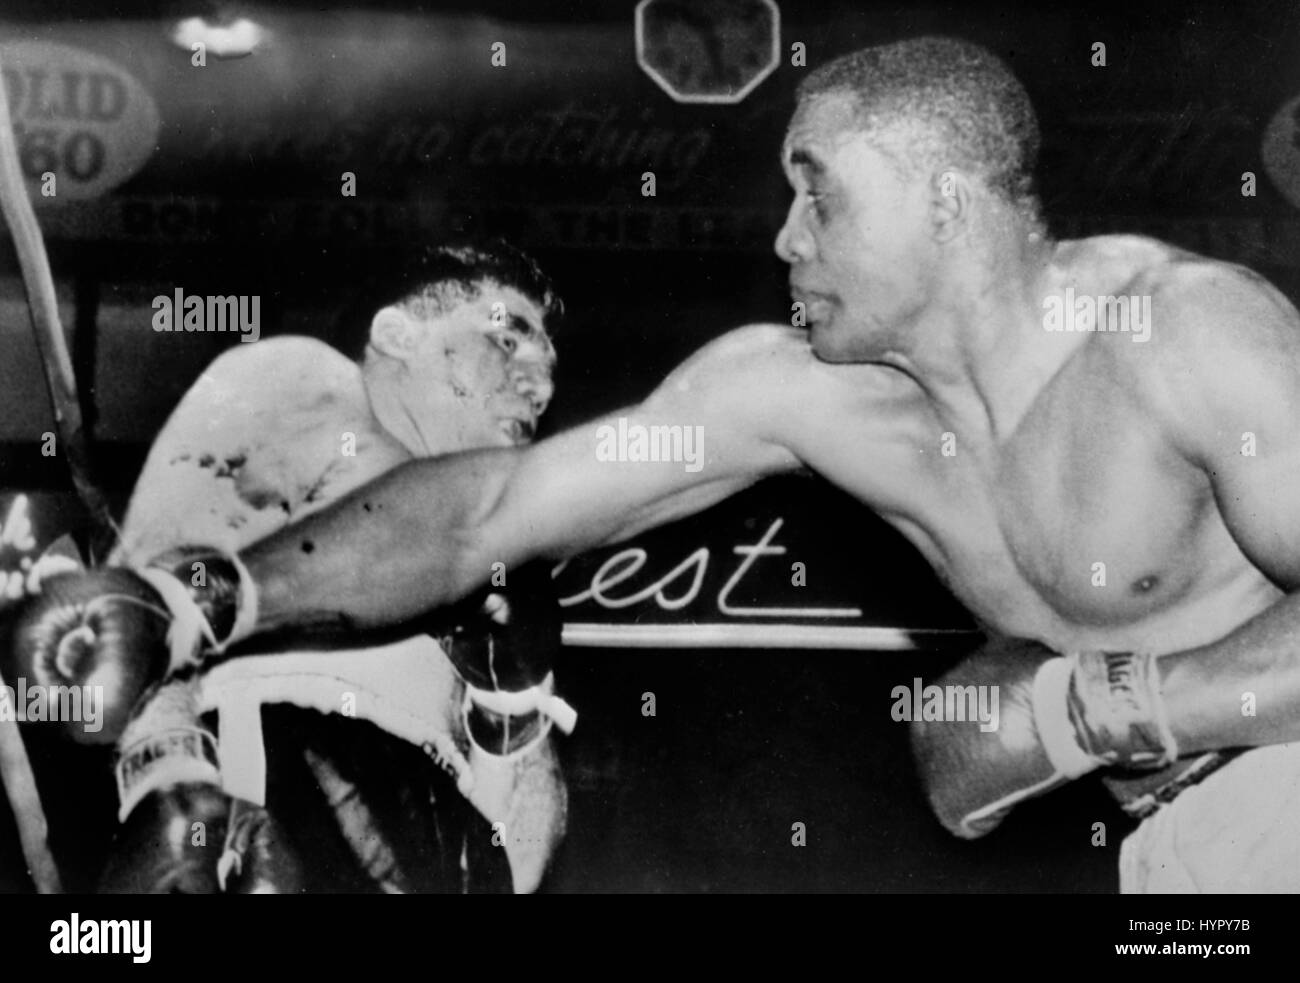 Willi Besmanoff (l), cornered by Sonny Liston, reels away from a hard right cross just before the end of the sixth round of their fight  at Cleveland.  Referee Mike Minnich stopped the fight at the end of the 6th round, giving 4th ranked Sonny Liston his 19th straight heavyweight victory. Stock Photo